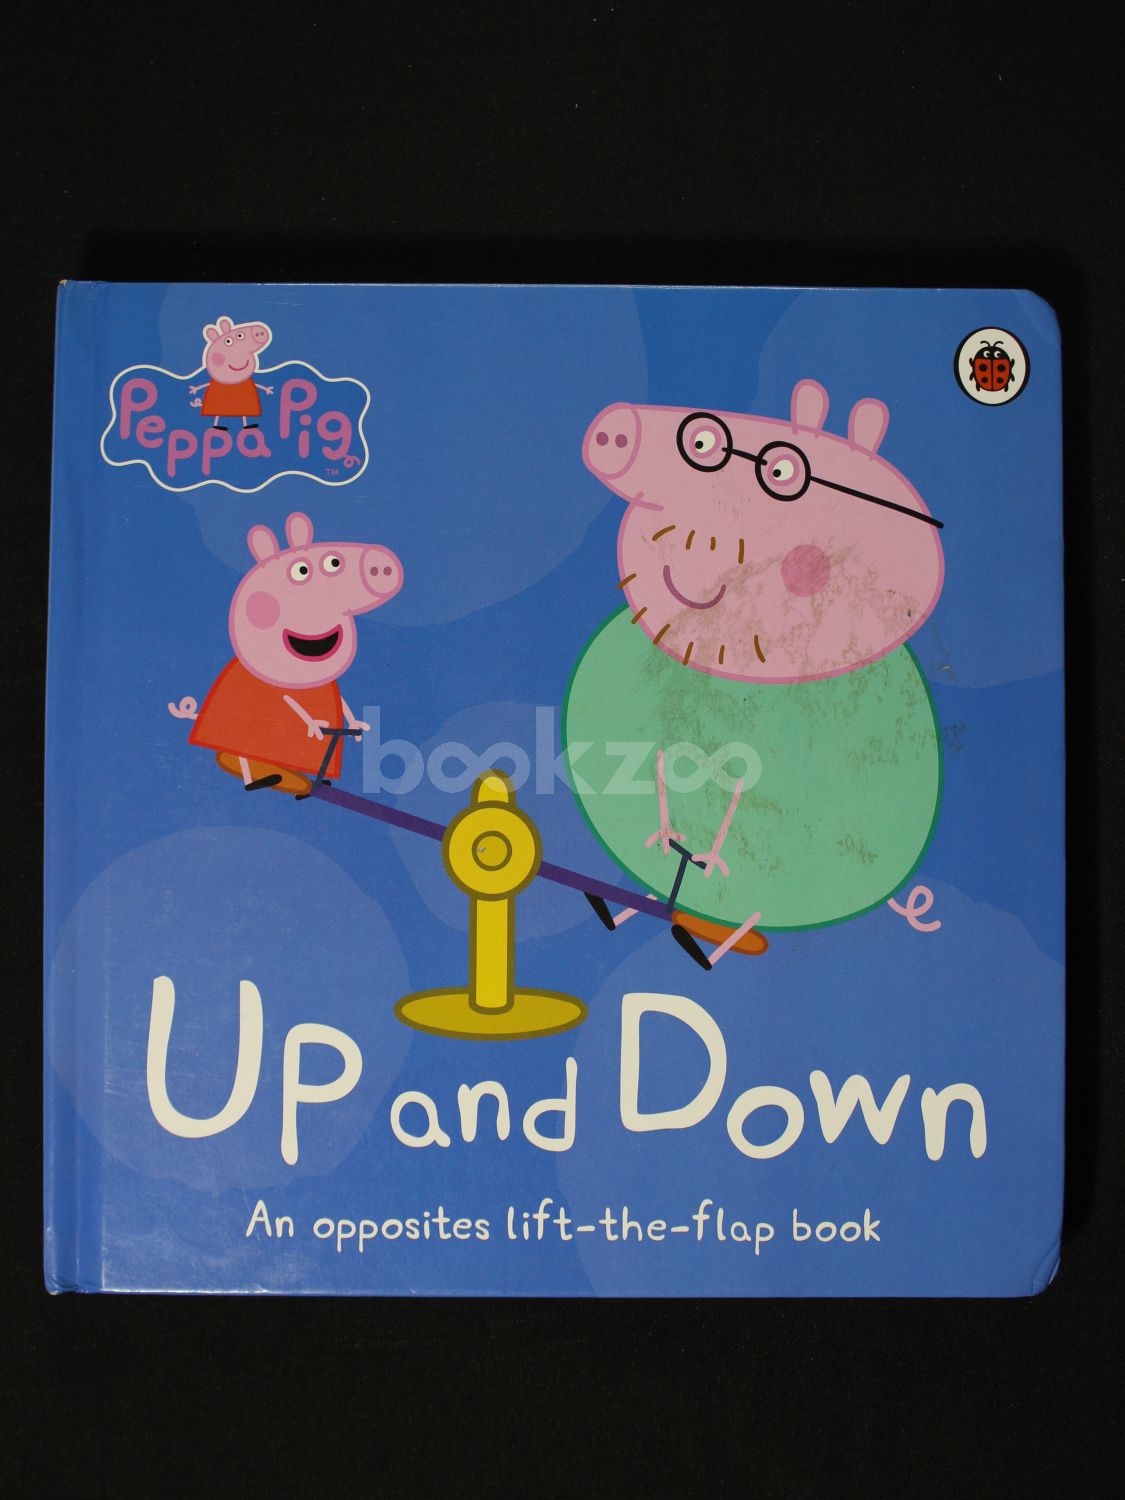 An　Opposites　and　at　bookstore　online　Down:　—　Lift-the-Flap　Up　Buy　Pig:　Peppa　Book